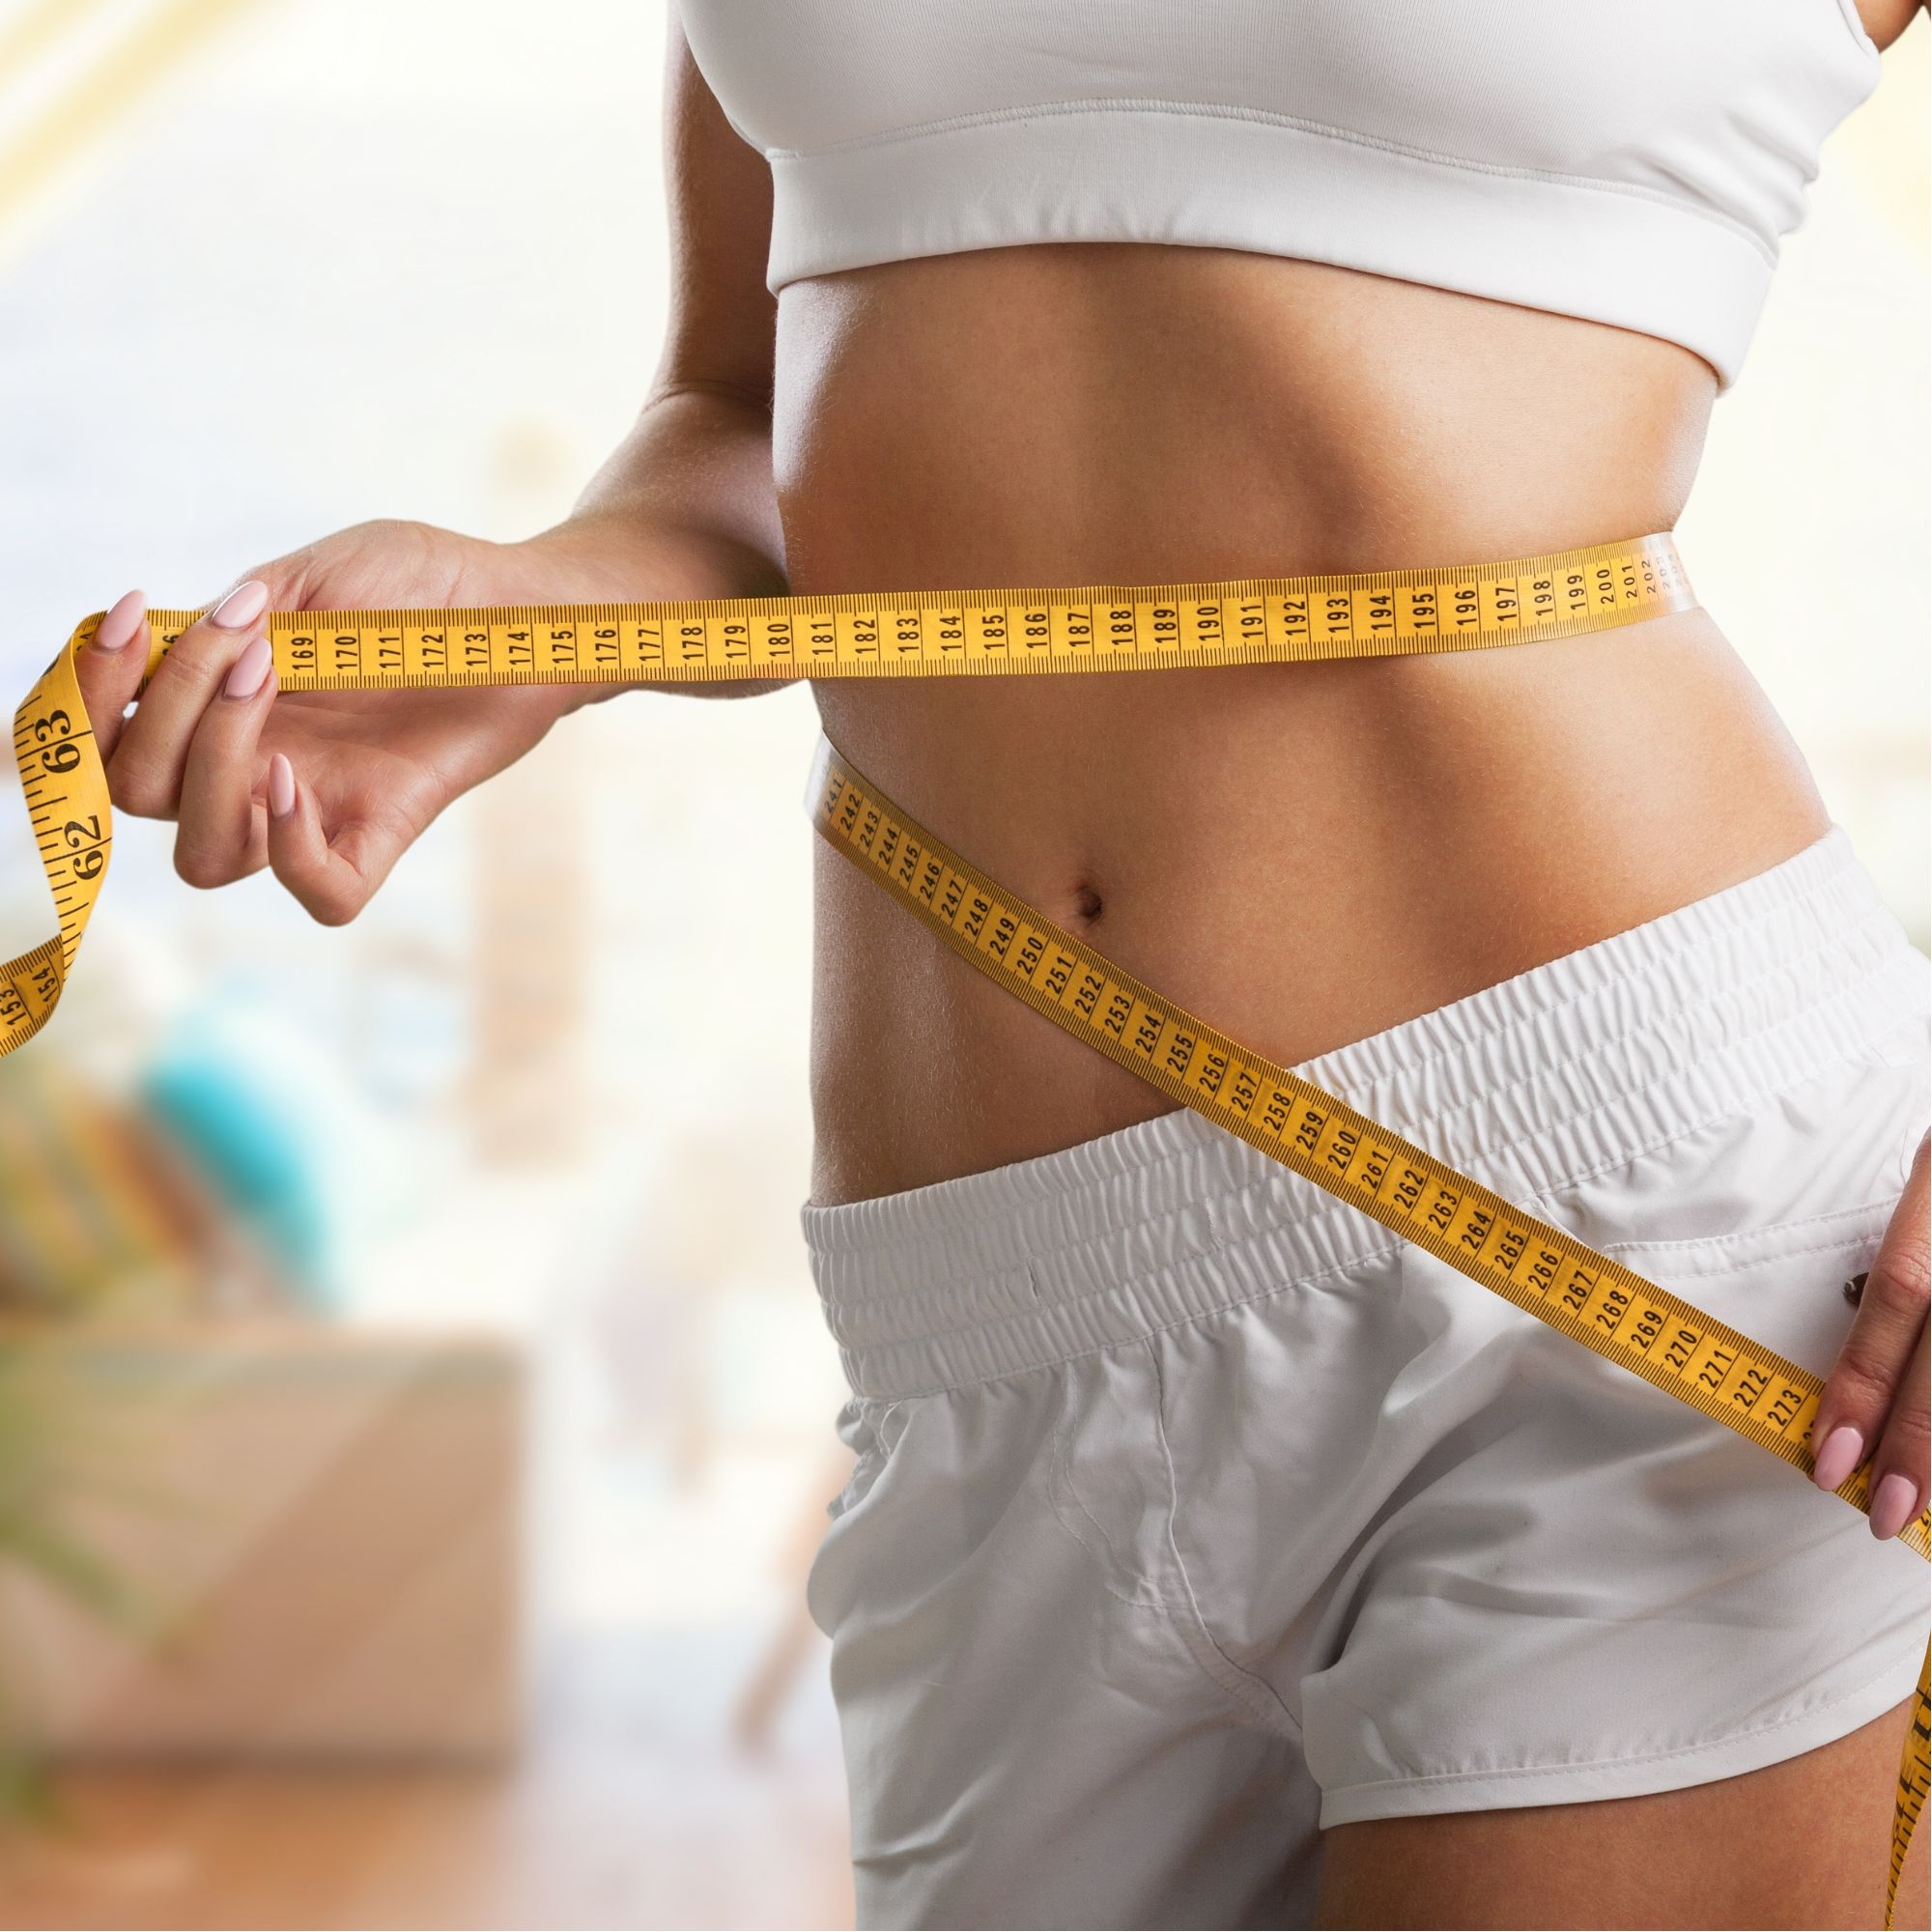 MEDICALLY SUPERVISED WEIGHT LOSS